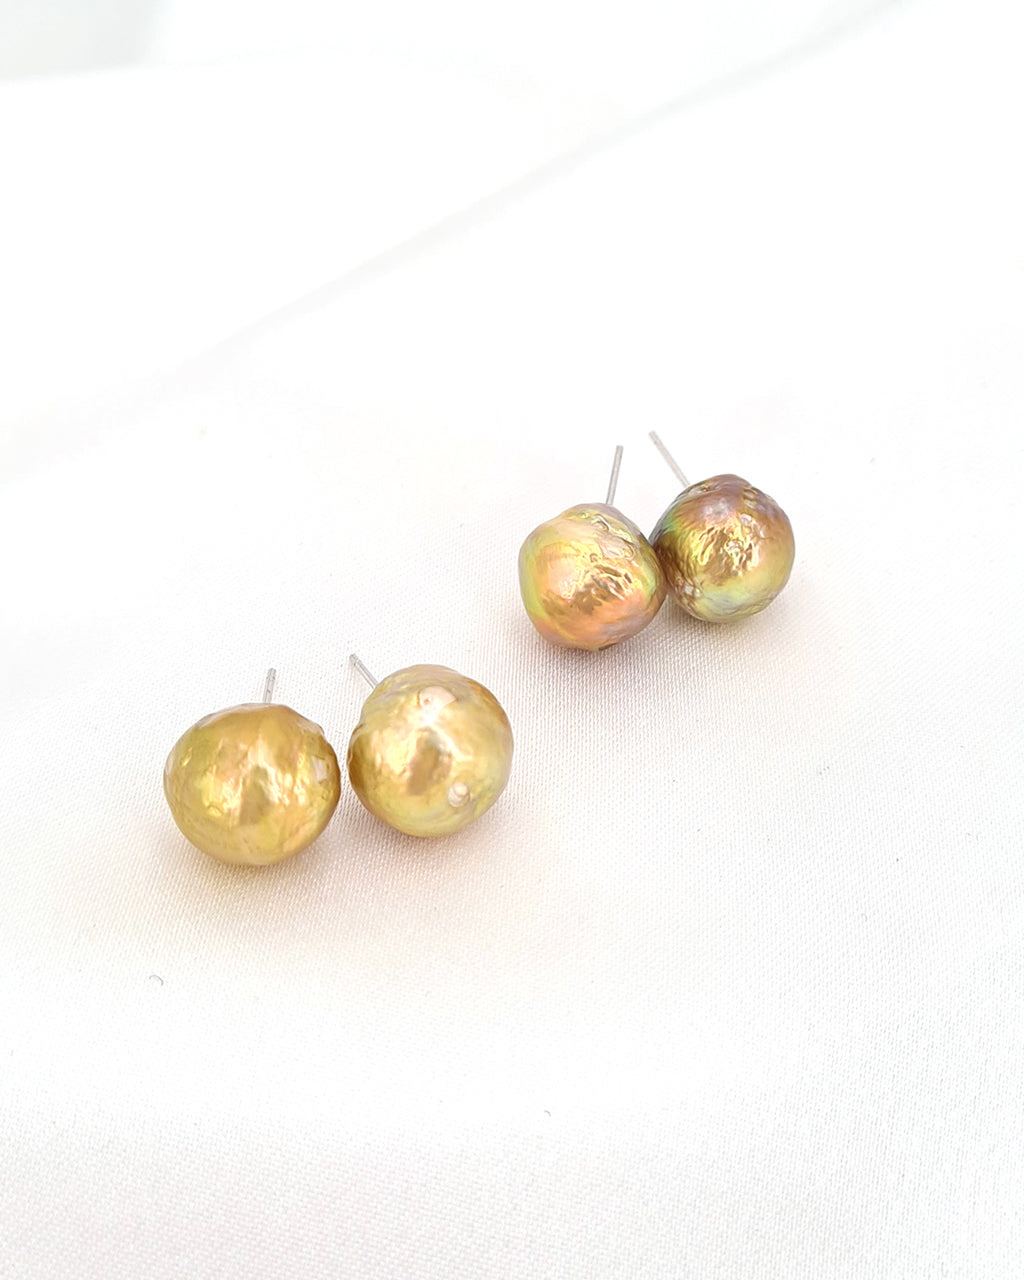 Big Pearl Stud Earrings - Smoky Buy Earrings Online Cheap, Jhumka Earrings  Online Shopping, Big Pearl Studs - Shop From The Latest Collection Of  Earrings For Women & Girls Online. Buy Studs,